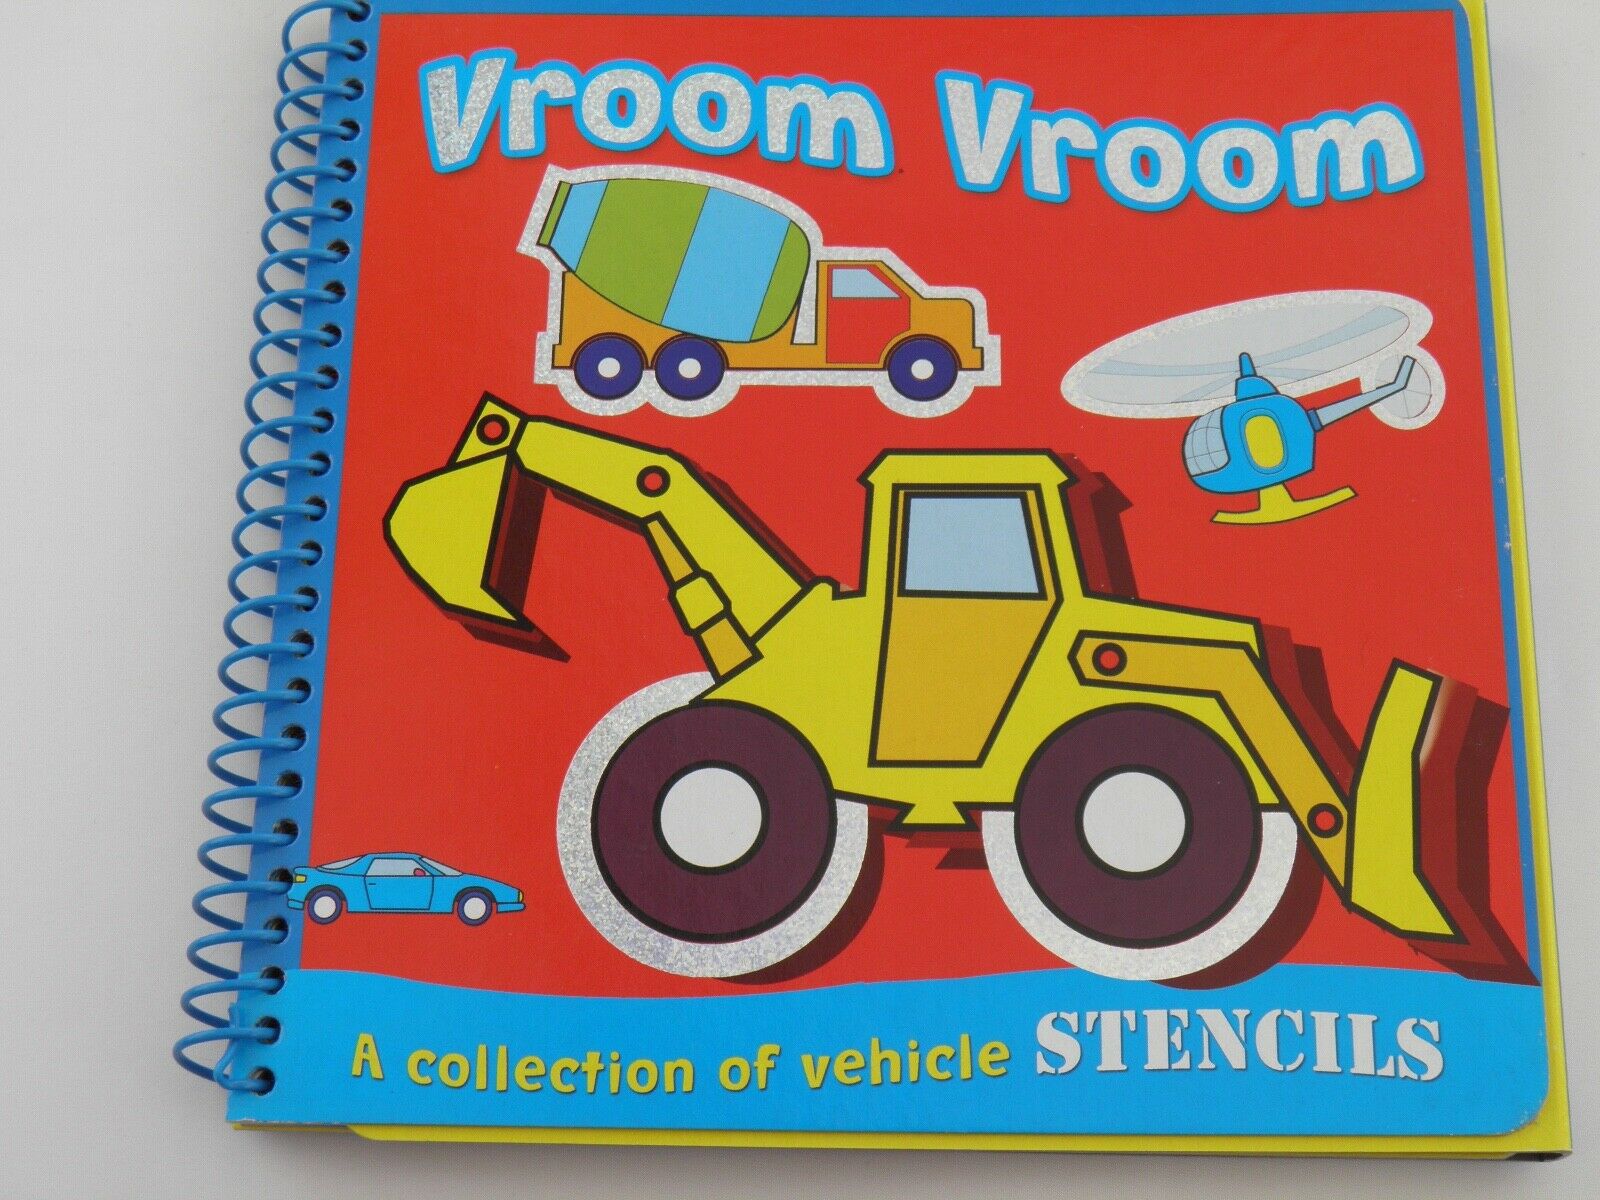 Vroom Vroom: A collection of vehicle stencils